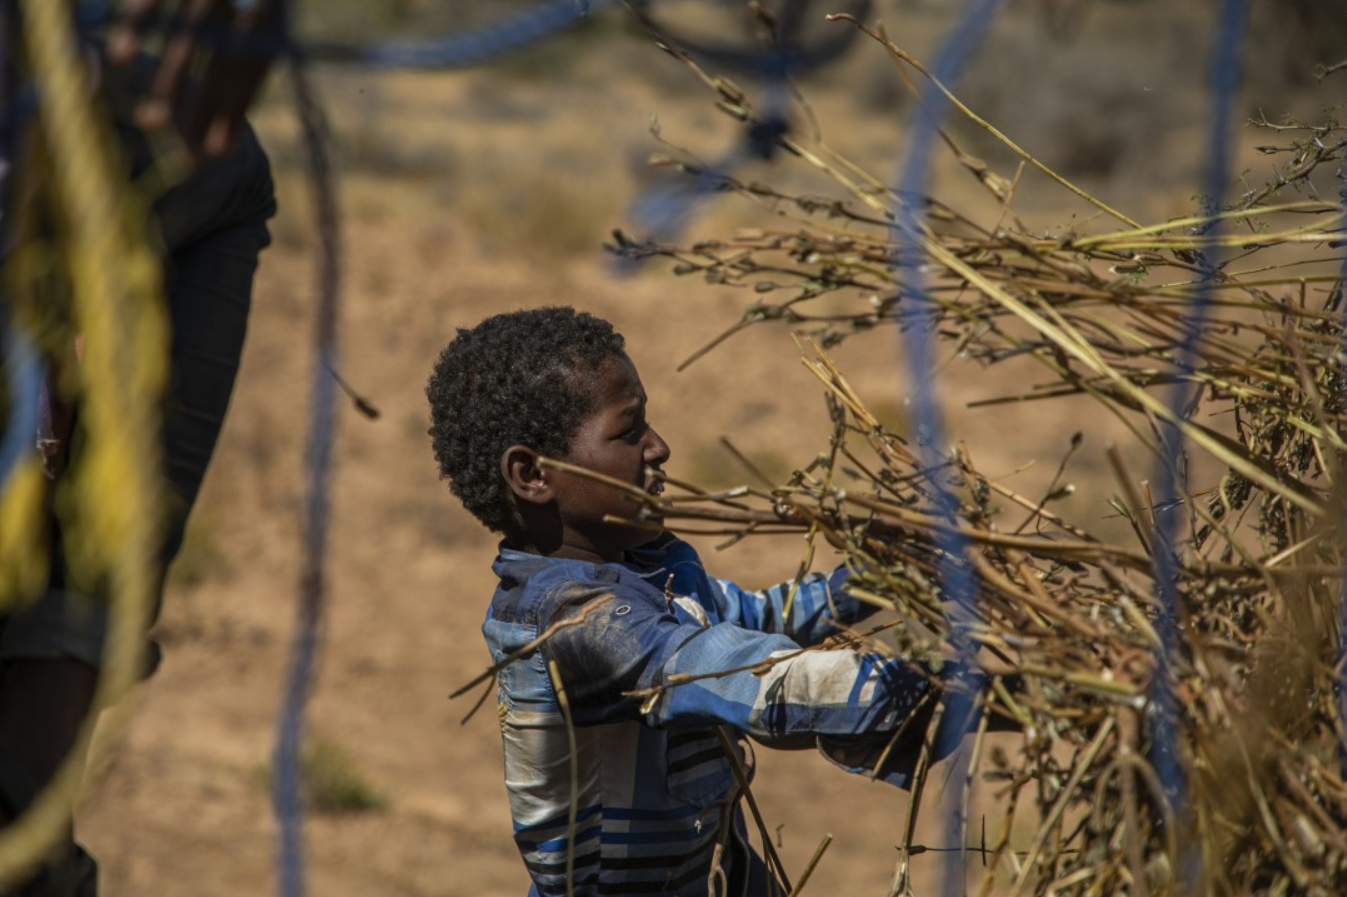 A boy helps collect the remains of a sesame crop that was devastated by locusts in Somalia. Will Swanson / For The Times. Somalia, 2020.